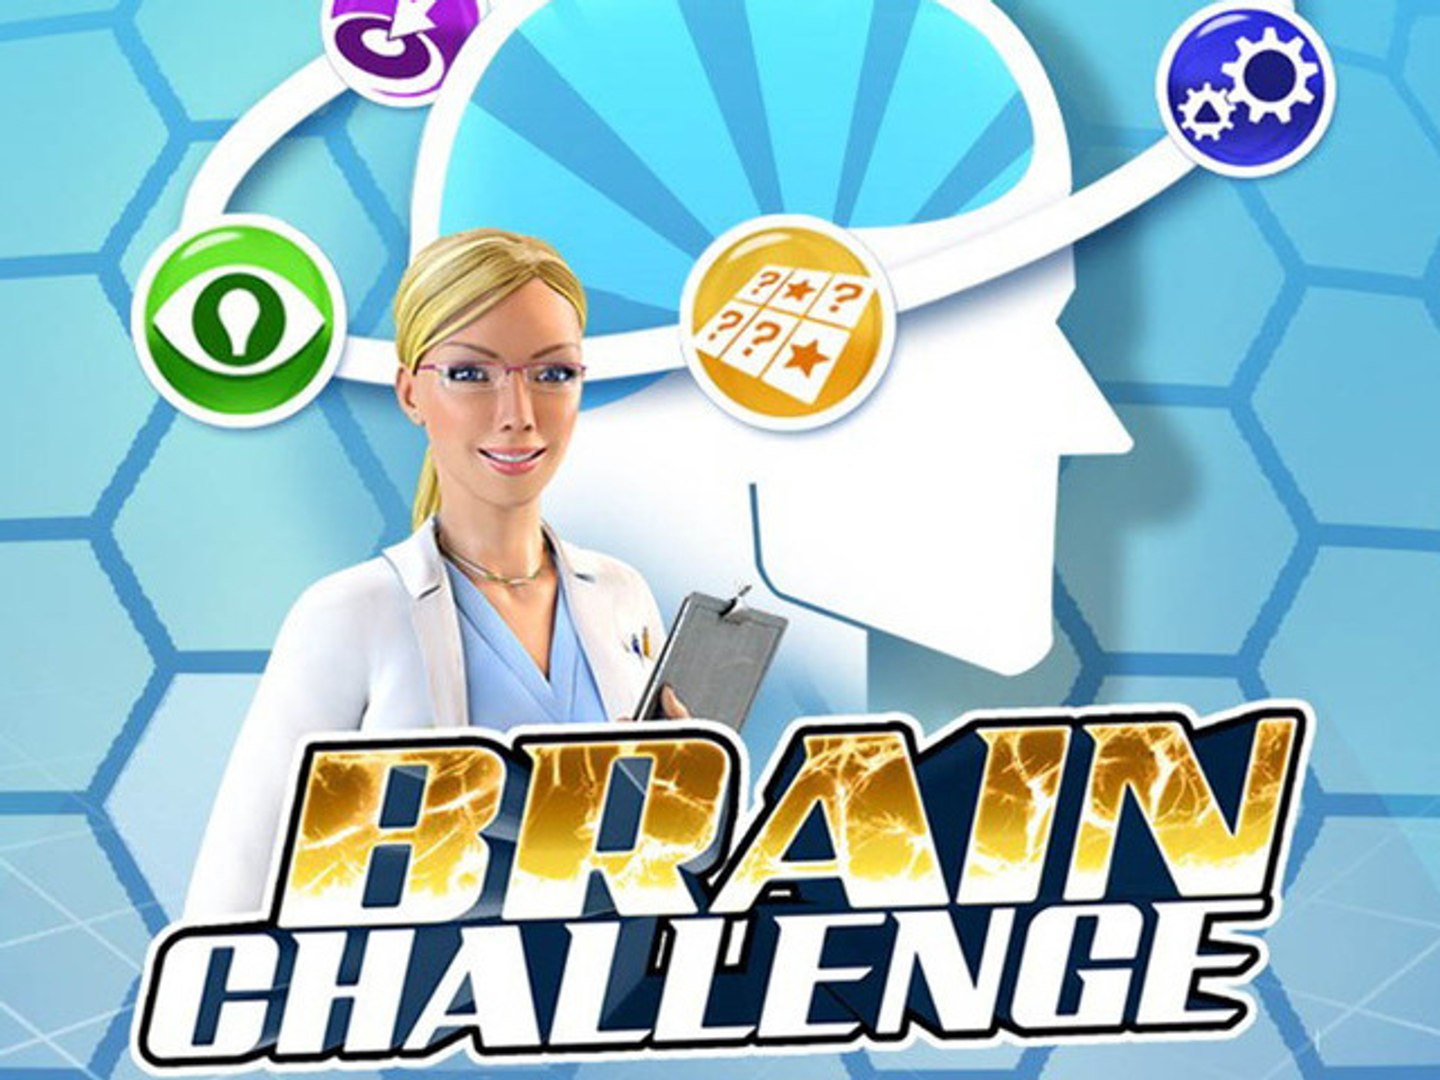 CGR Undertow - BRAIN CHALLENGE review for PSP - video Dailymotion